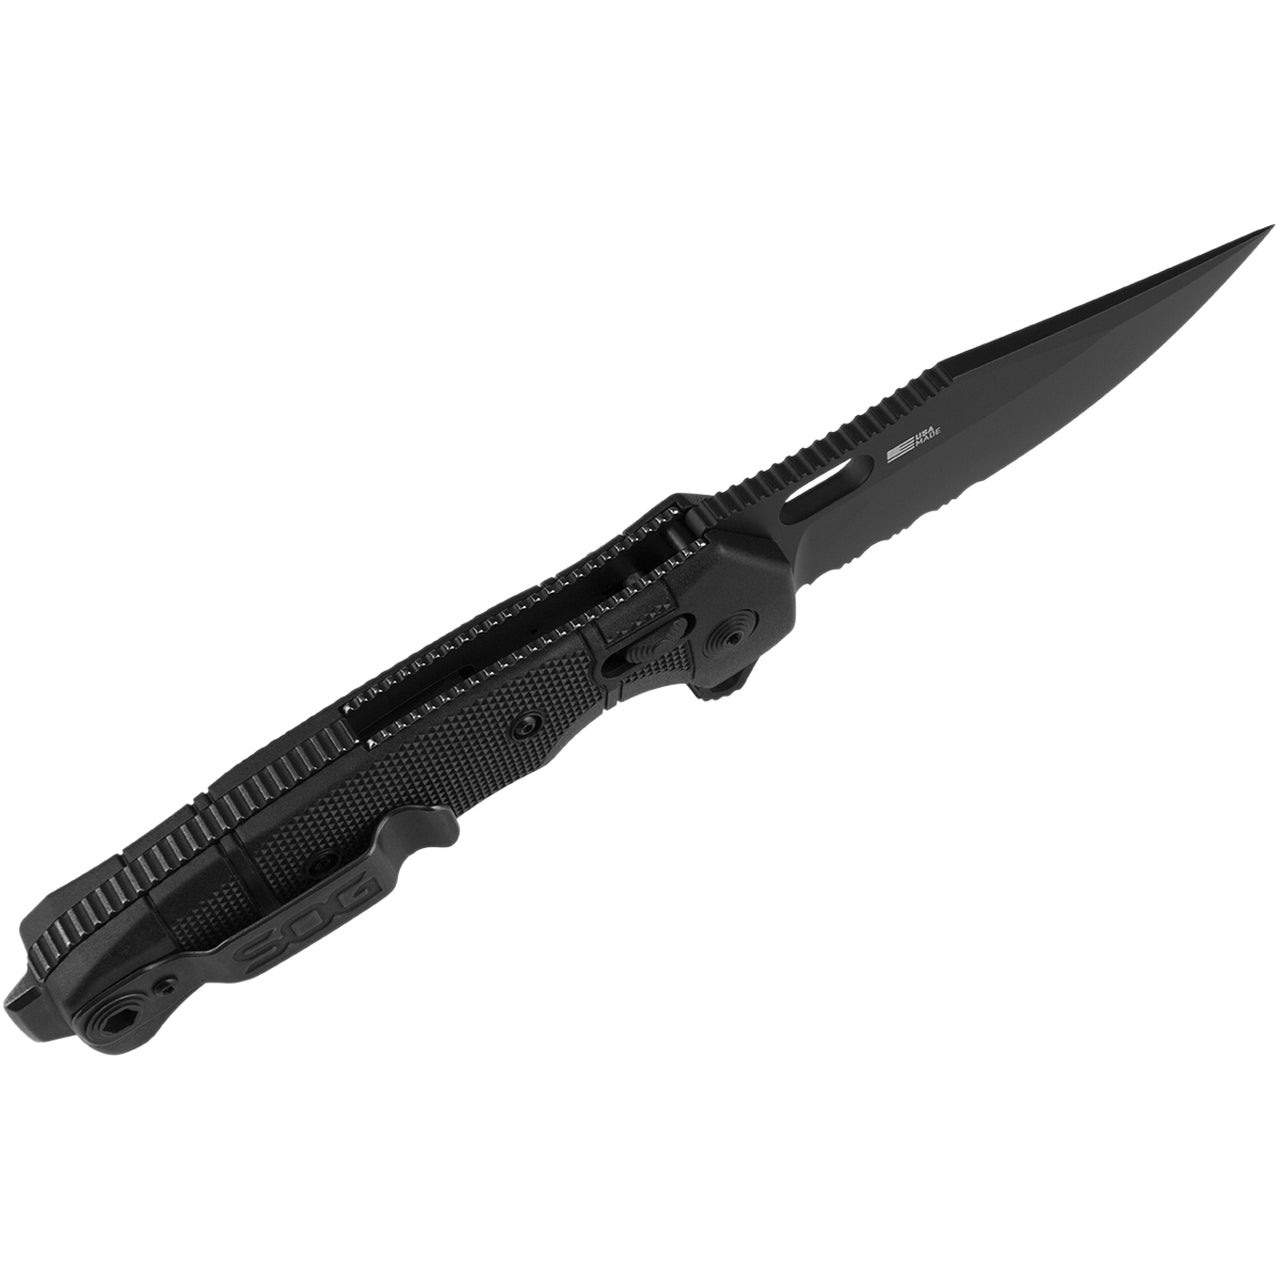 SOG - SEAL XR - Partially Serrated